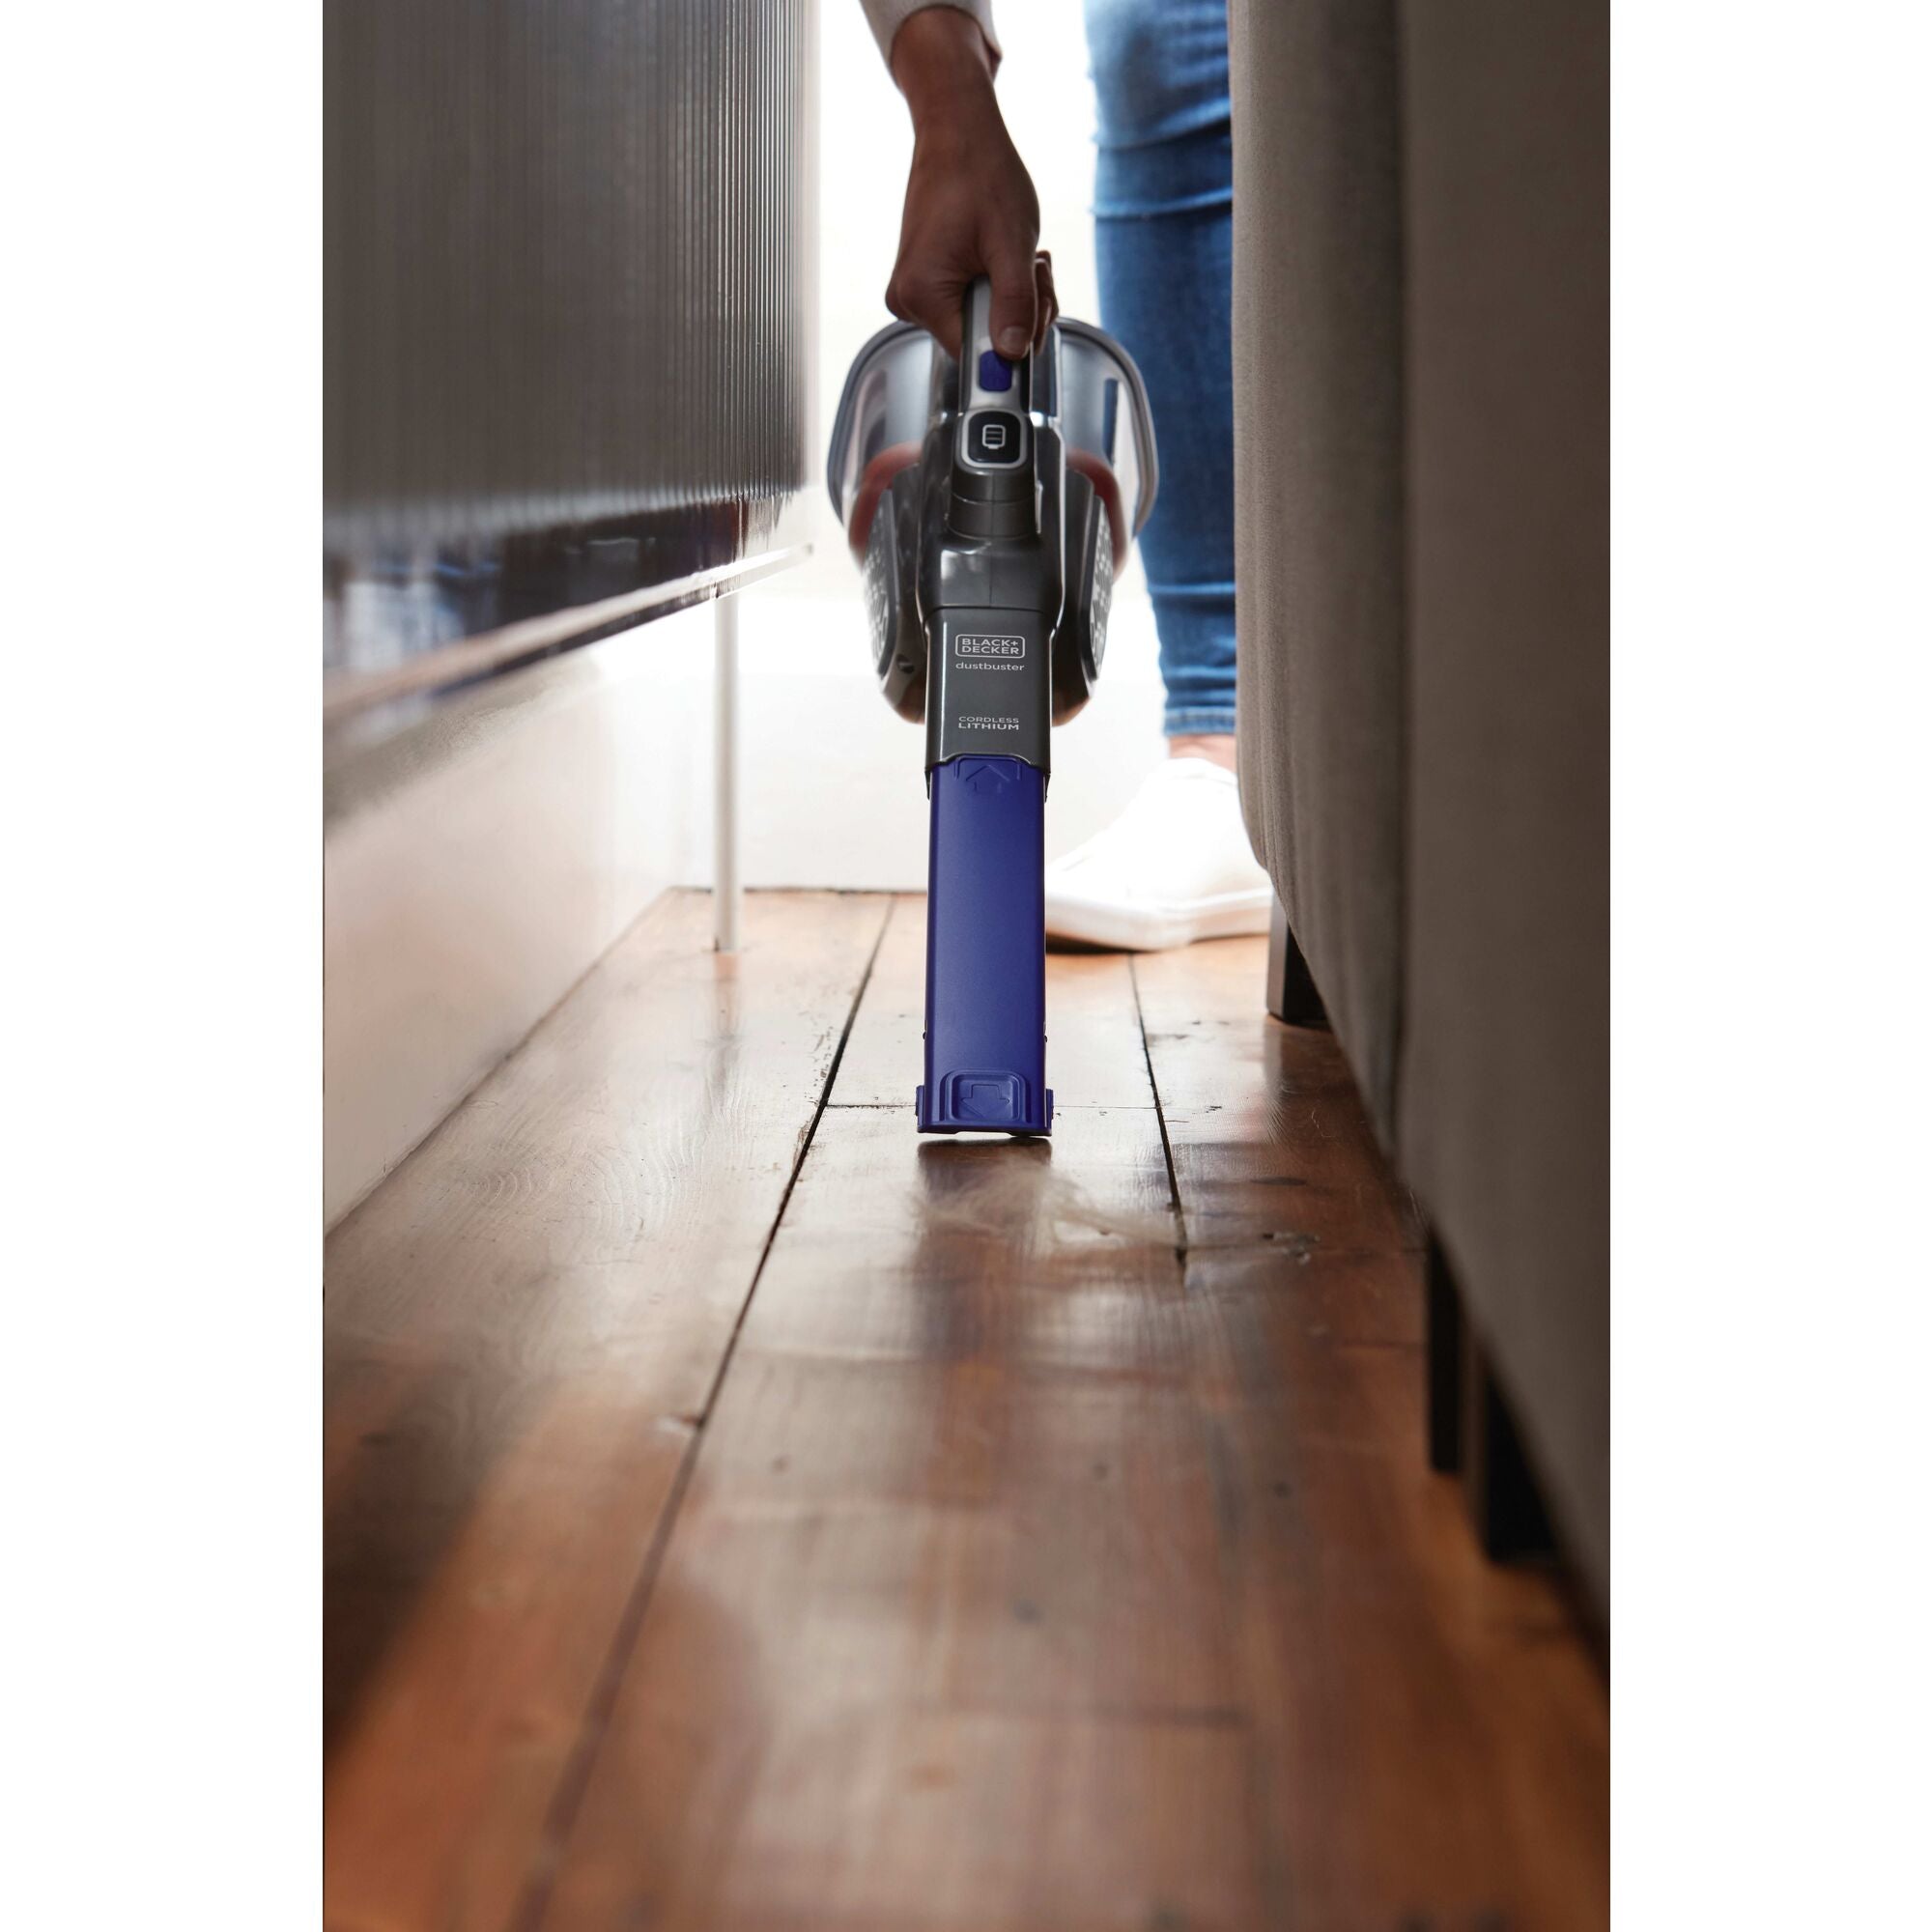 Dustbuster Advanced Clean plus Pet Cordless Hand Vacuum being used by person to clean the nooks and corners of car seat.